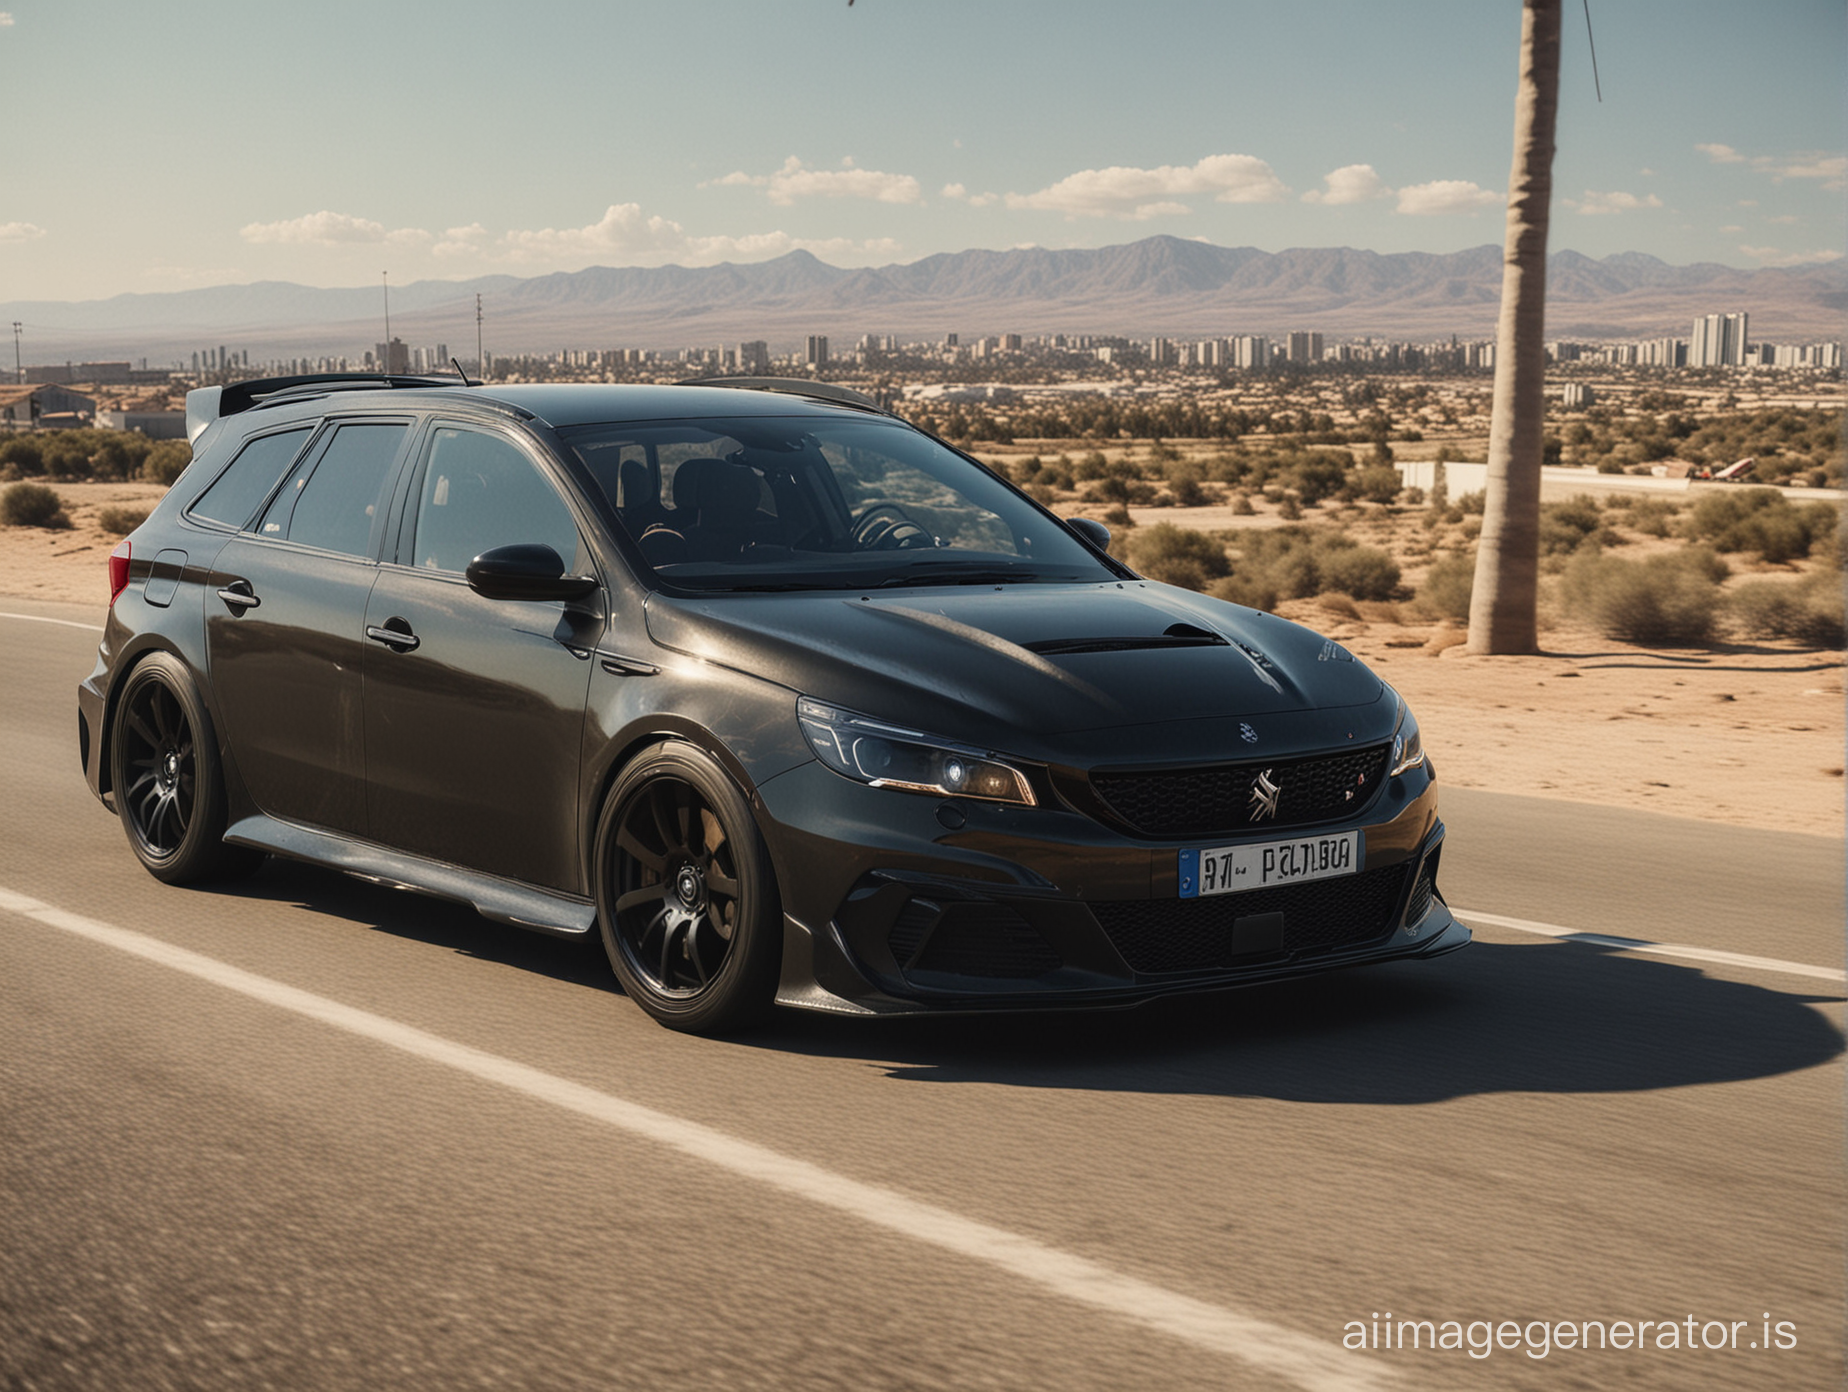 Heavy modified, Khyzyl Saleem, Need for speed, fast and the furious, version of the 2018 Peugeot 308 SW. Noon. Black. Establishing shot. Don't cut off the car.